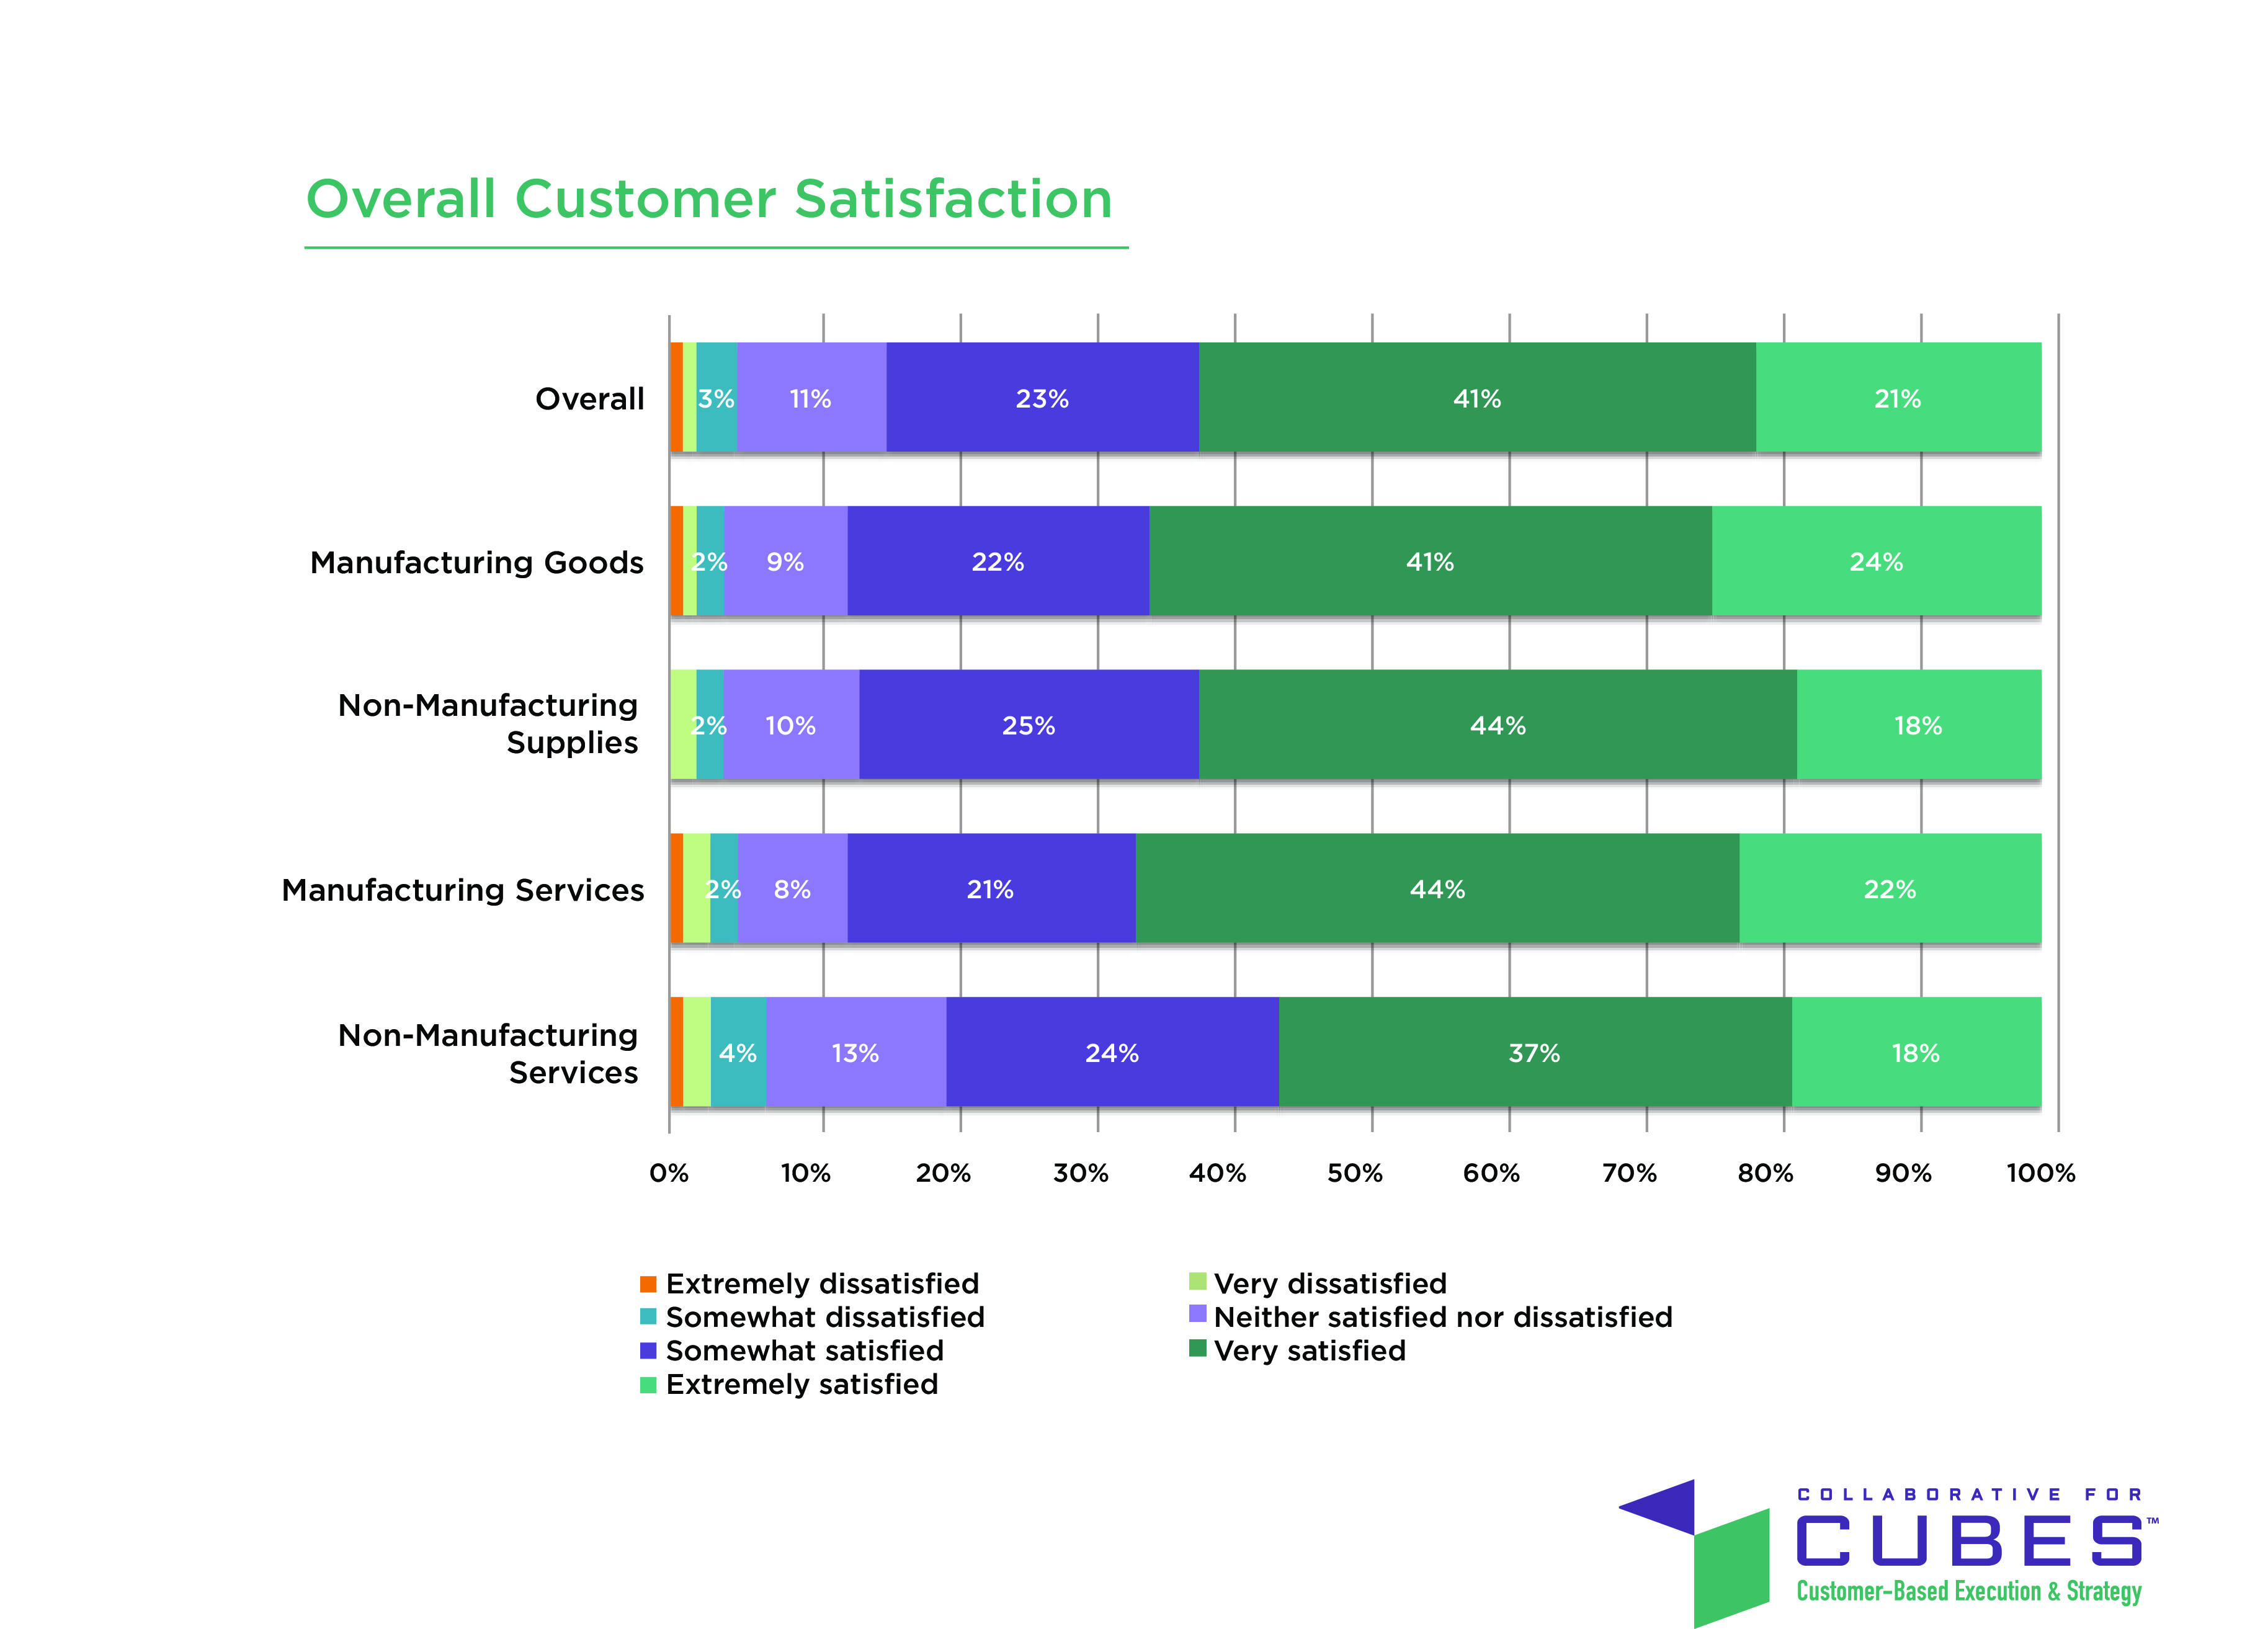 A likert scale to measure customer satisfaction.